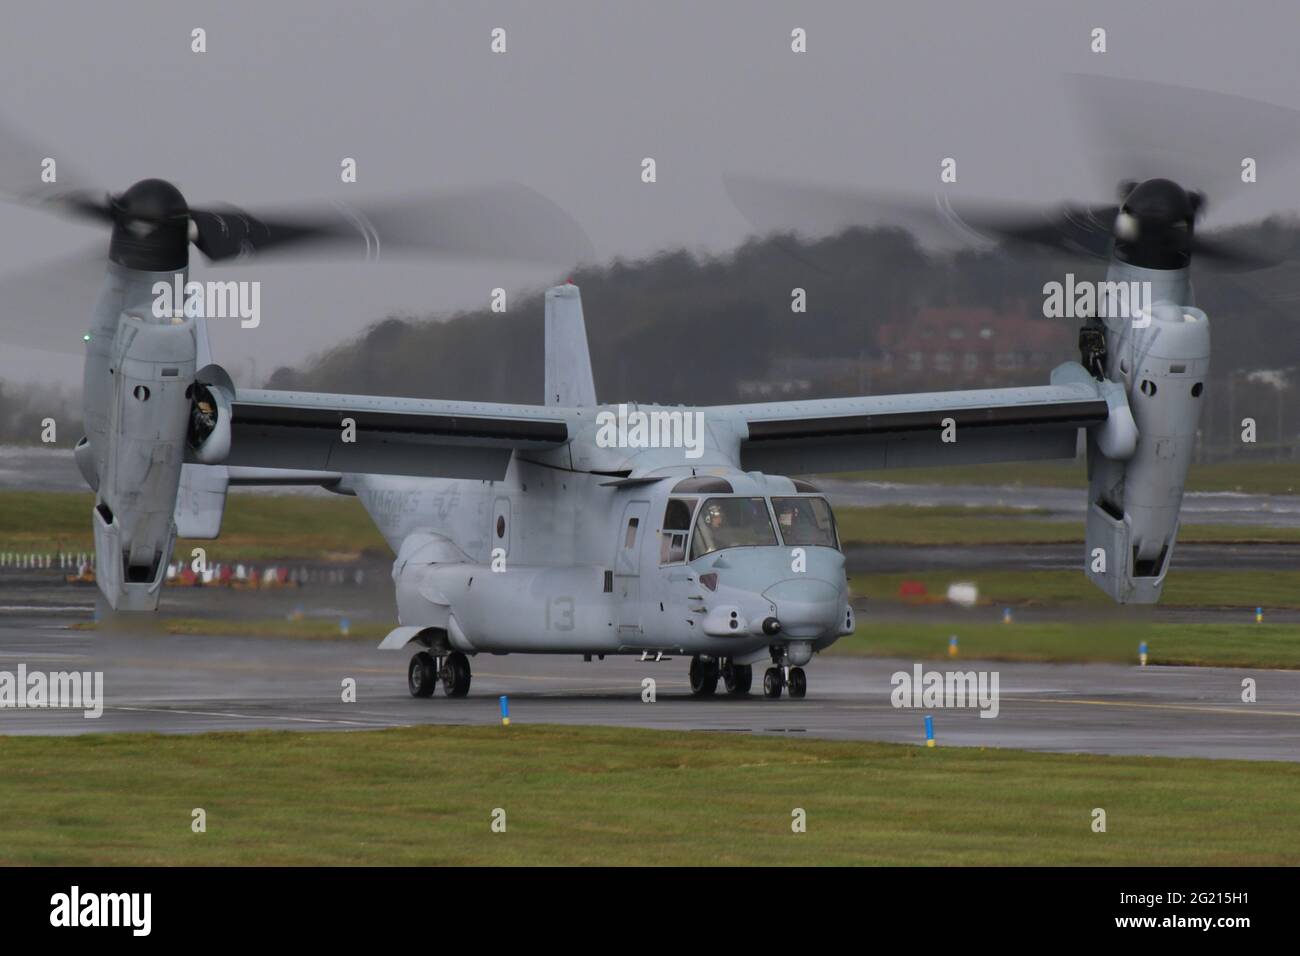 168666, a Bell Boeing MV-22B Osprey operated by the United States Marine Corps, departing from Prestwick International Airport in Ayrshire, Scotland. Stock Photo